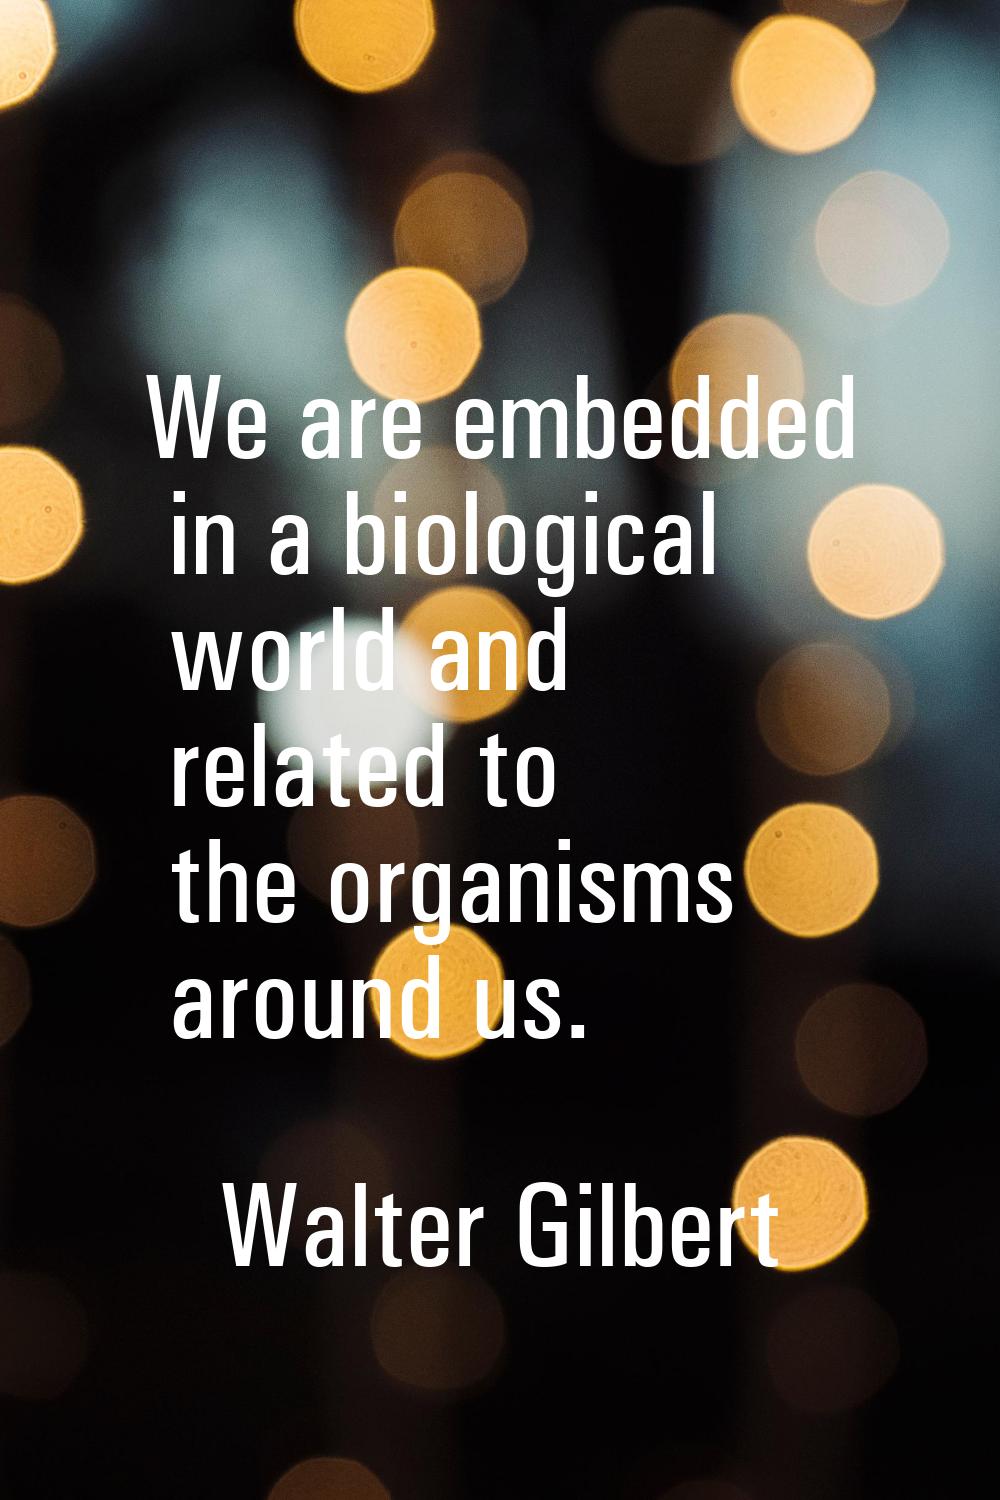 We are embedded in a biological world and related to the organisms around us.